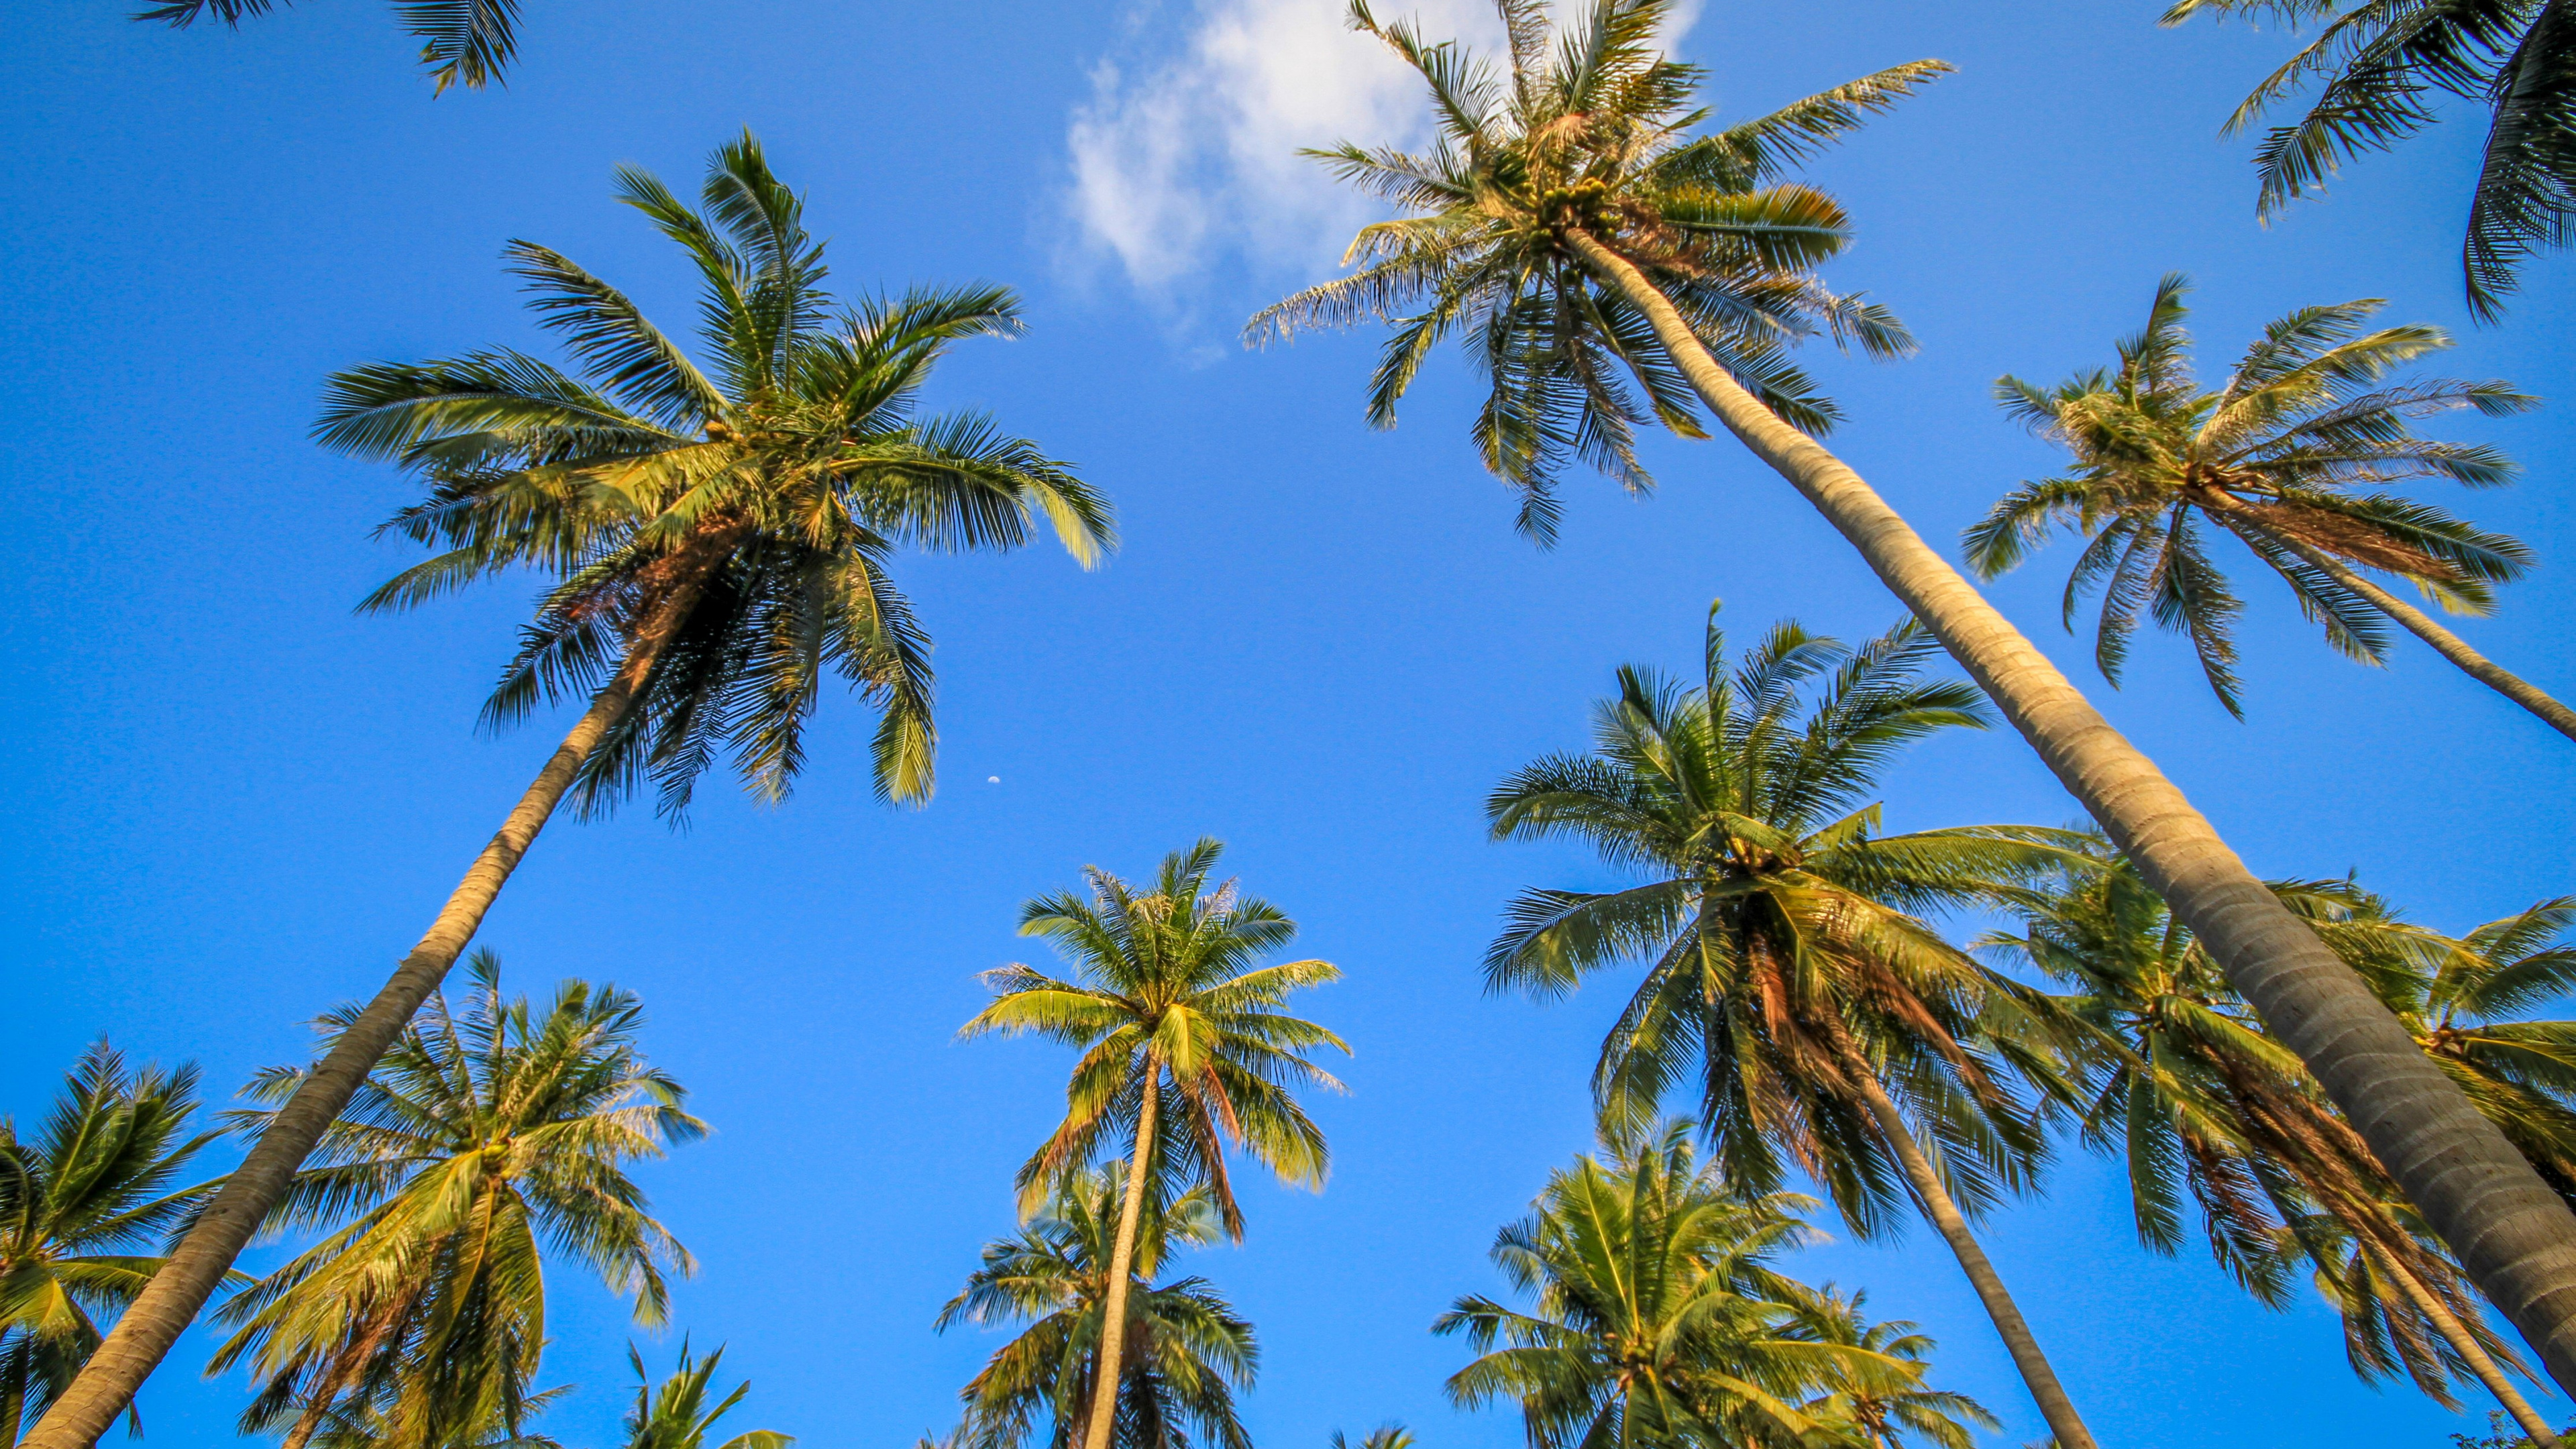 Green Palm Tree Under Blue Sky During Daytime. Wallpaper in 3840x2160 Resolution